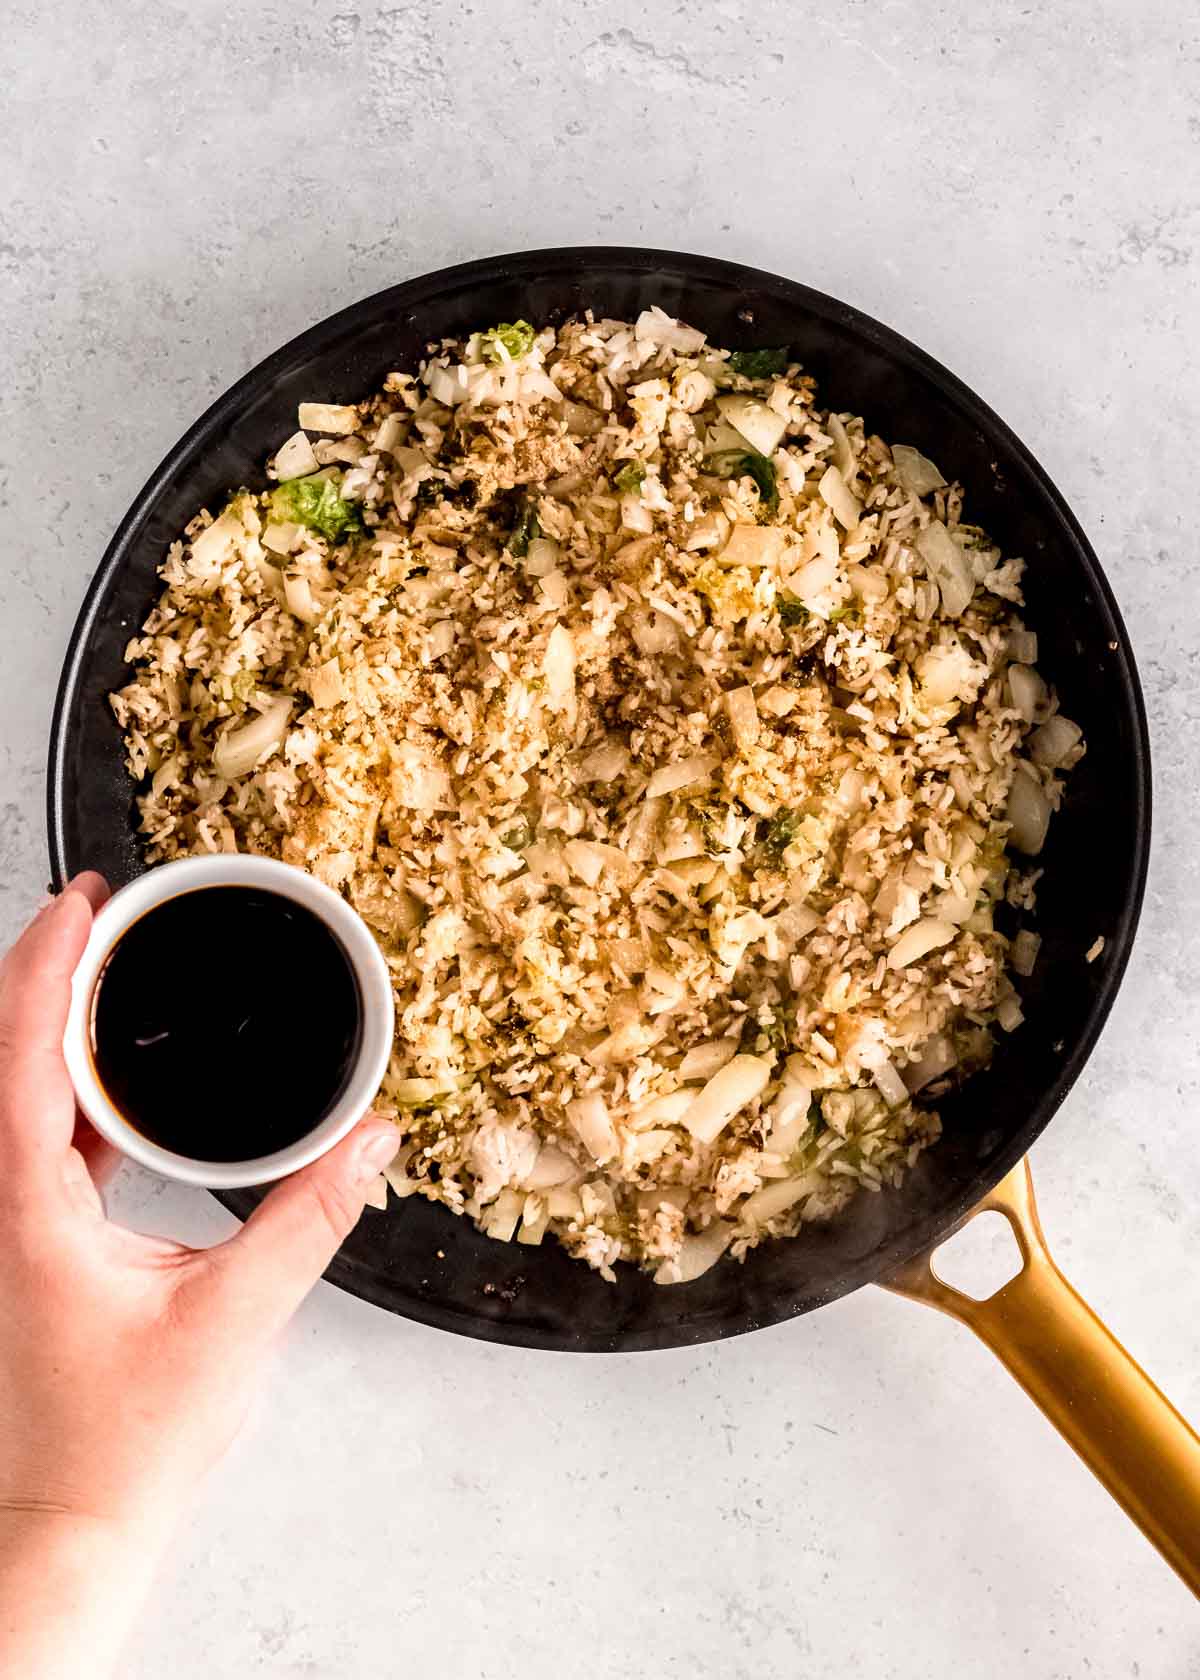 soy sauce being added to the fried rice with brussels sprouts, onions, and garlic